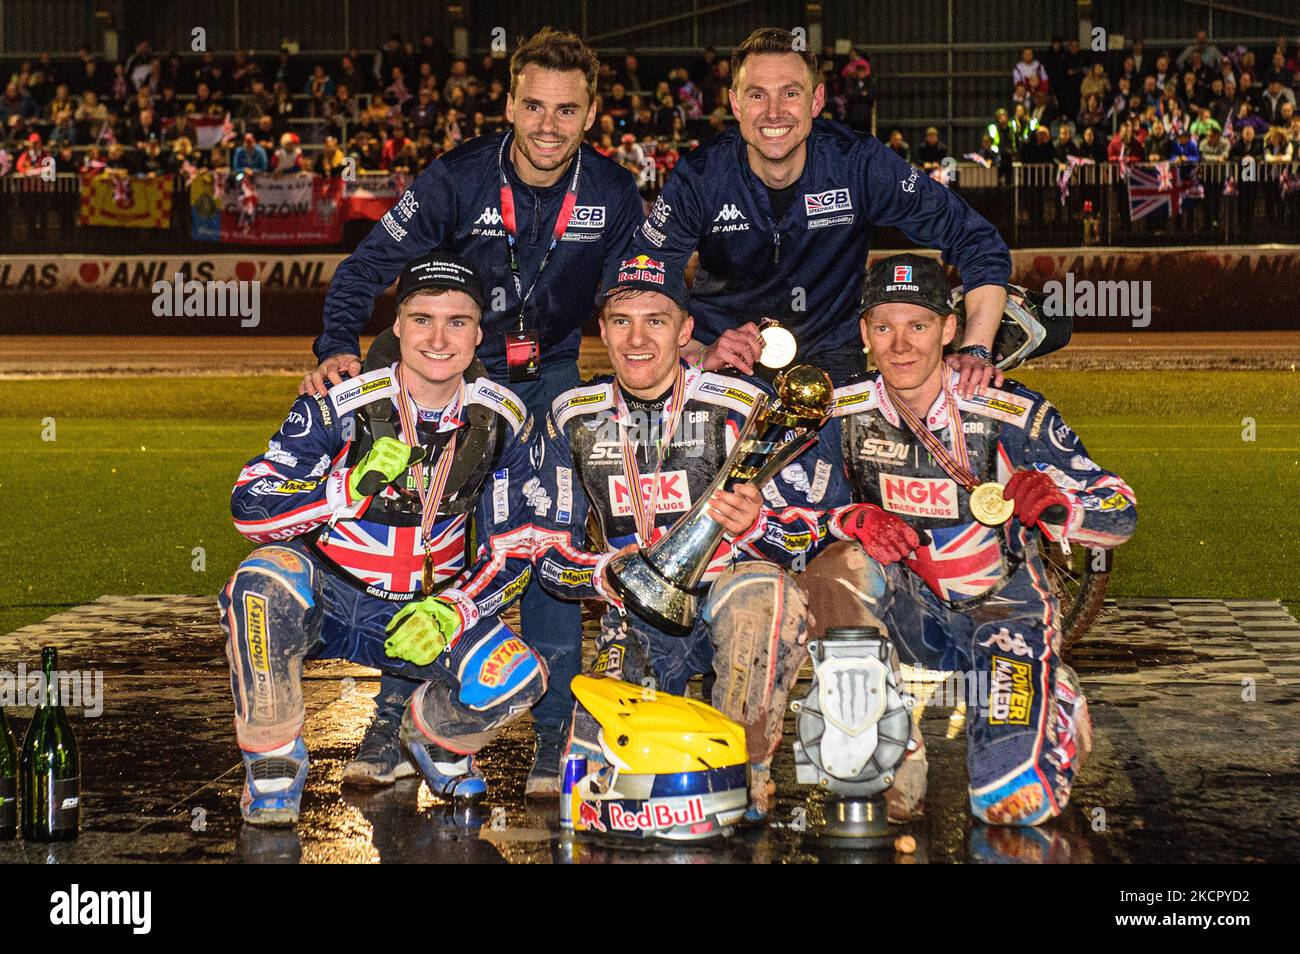 Great Britain - Speedway of Nations Champions: (Rear l-r) Ollie Allen and Simon Stead (joint managers),(Kneeling l-r): Tom Brennan , Robert Lambert, Dan Bewley during the Monster Energy FIM Speedway of Nations at the National Speedway Stadium, Manchester on Sunday 17th October 2021. (Photo by Ian Charles/MI News/NurPhoto) Stock Photo